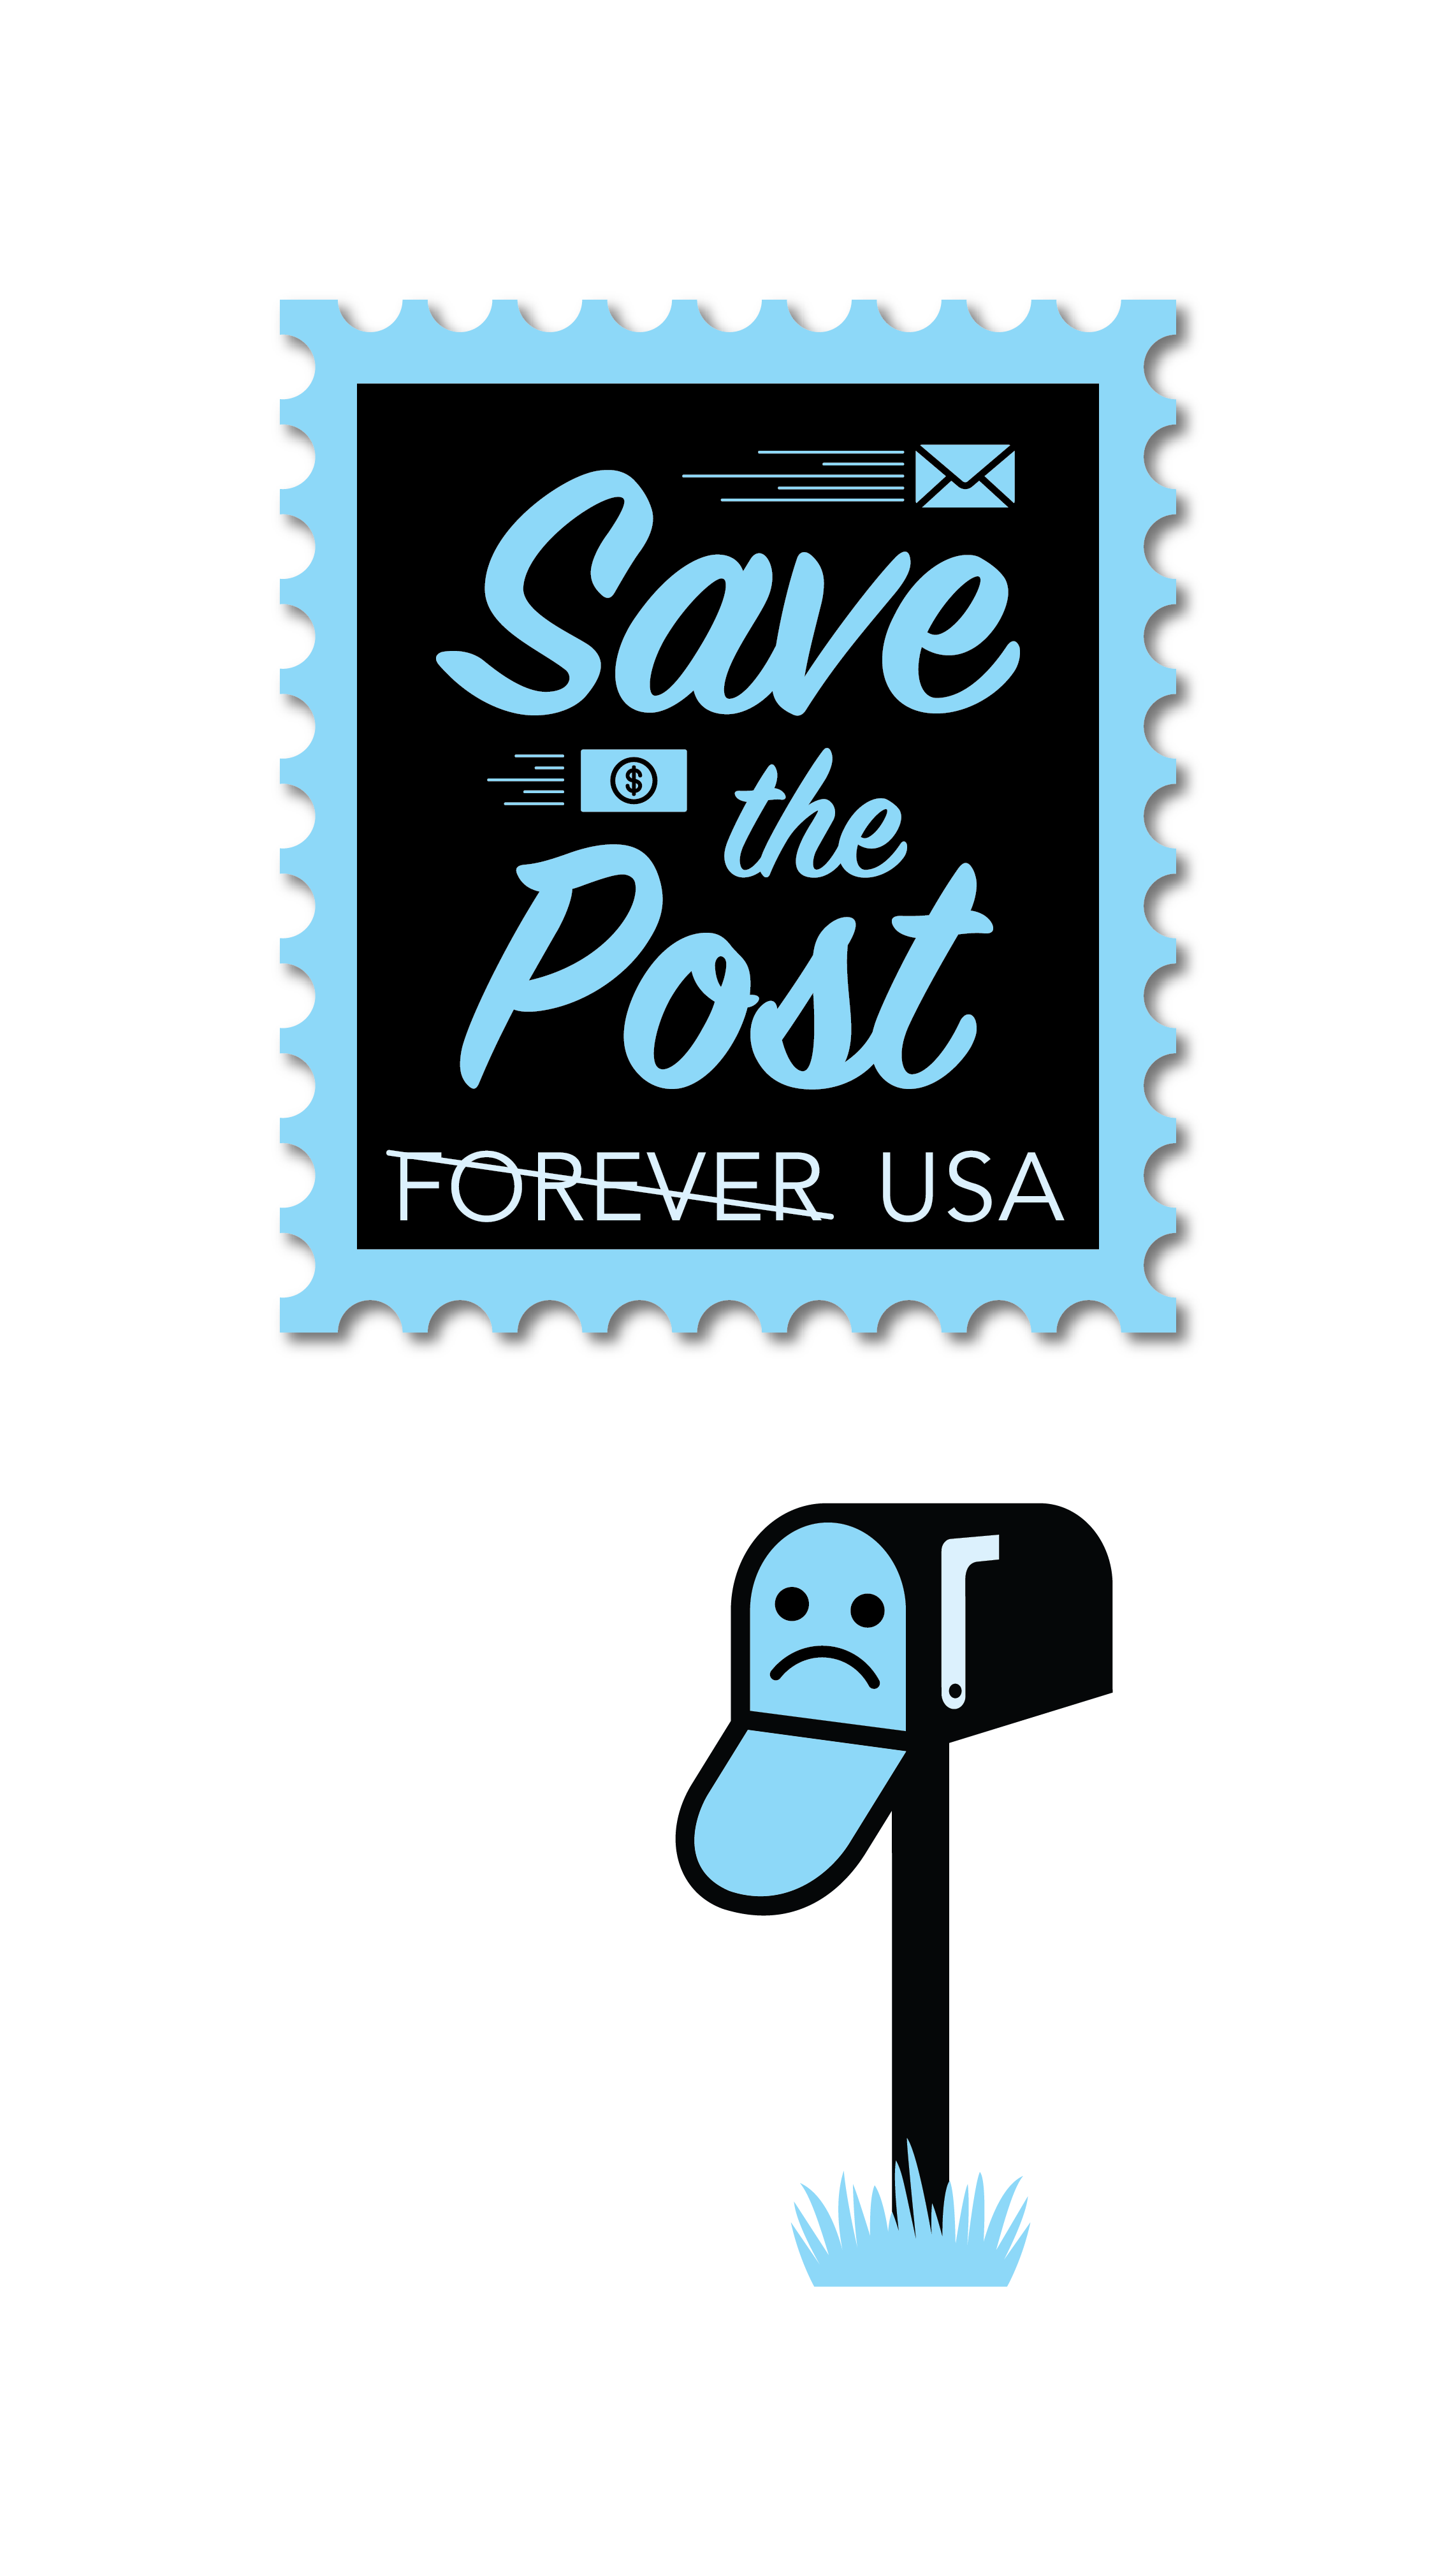 Save the Post Forever USA